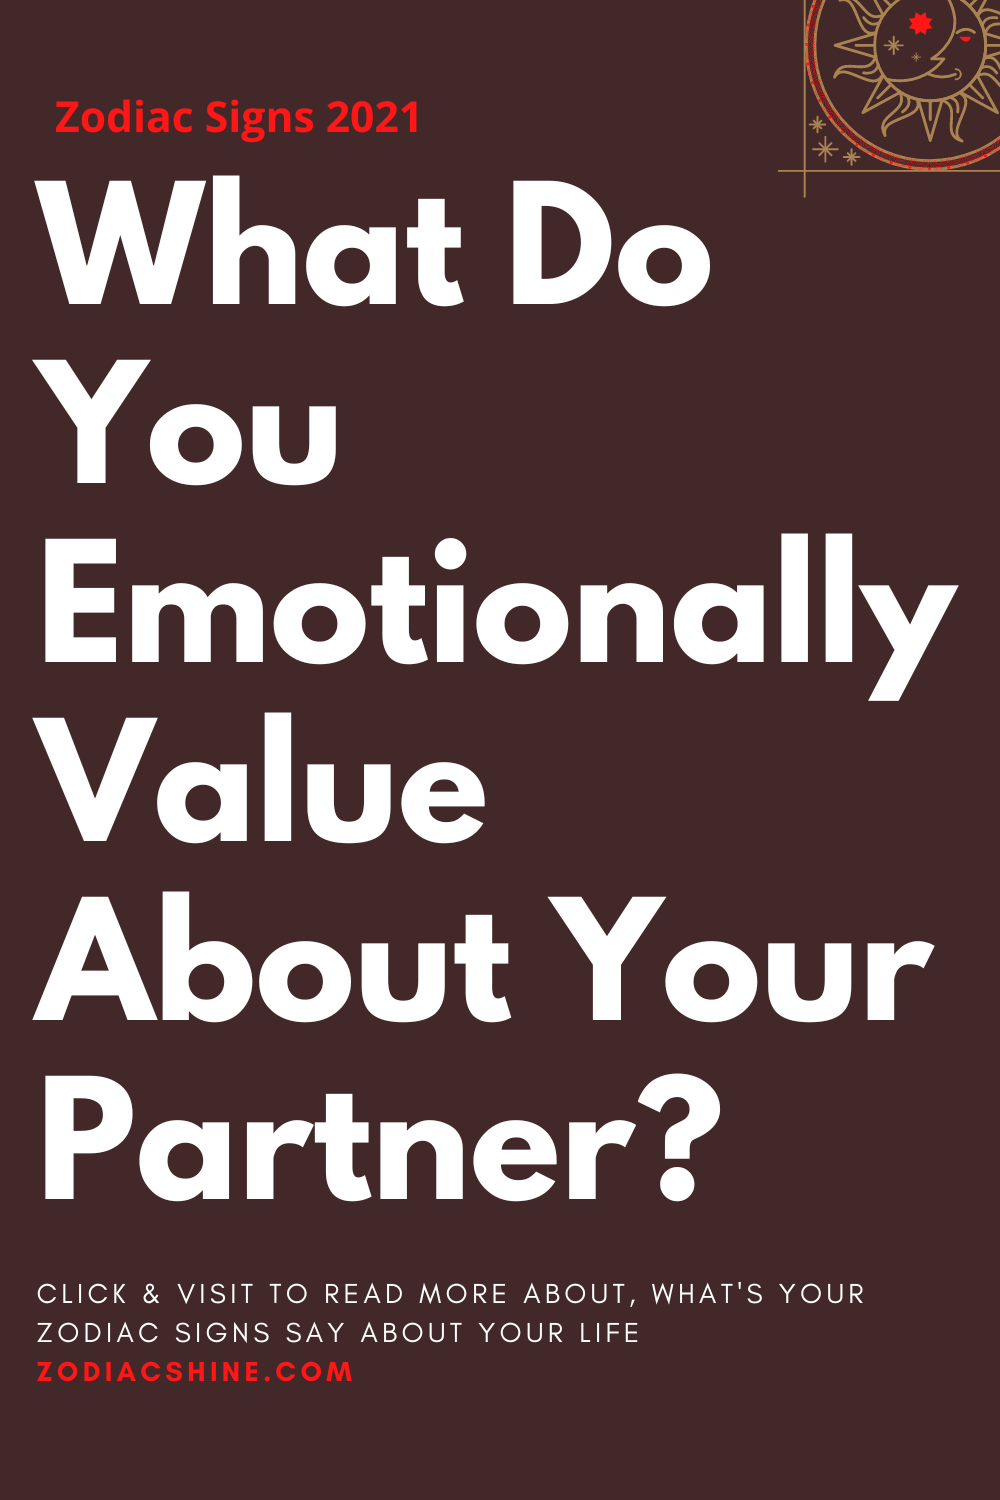 What Do You Emotionally Value About Your Partner?